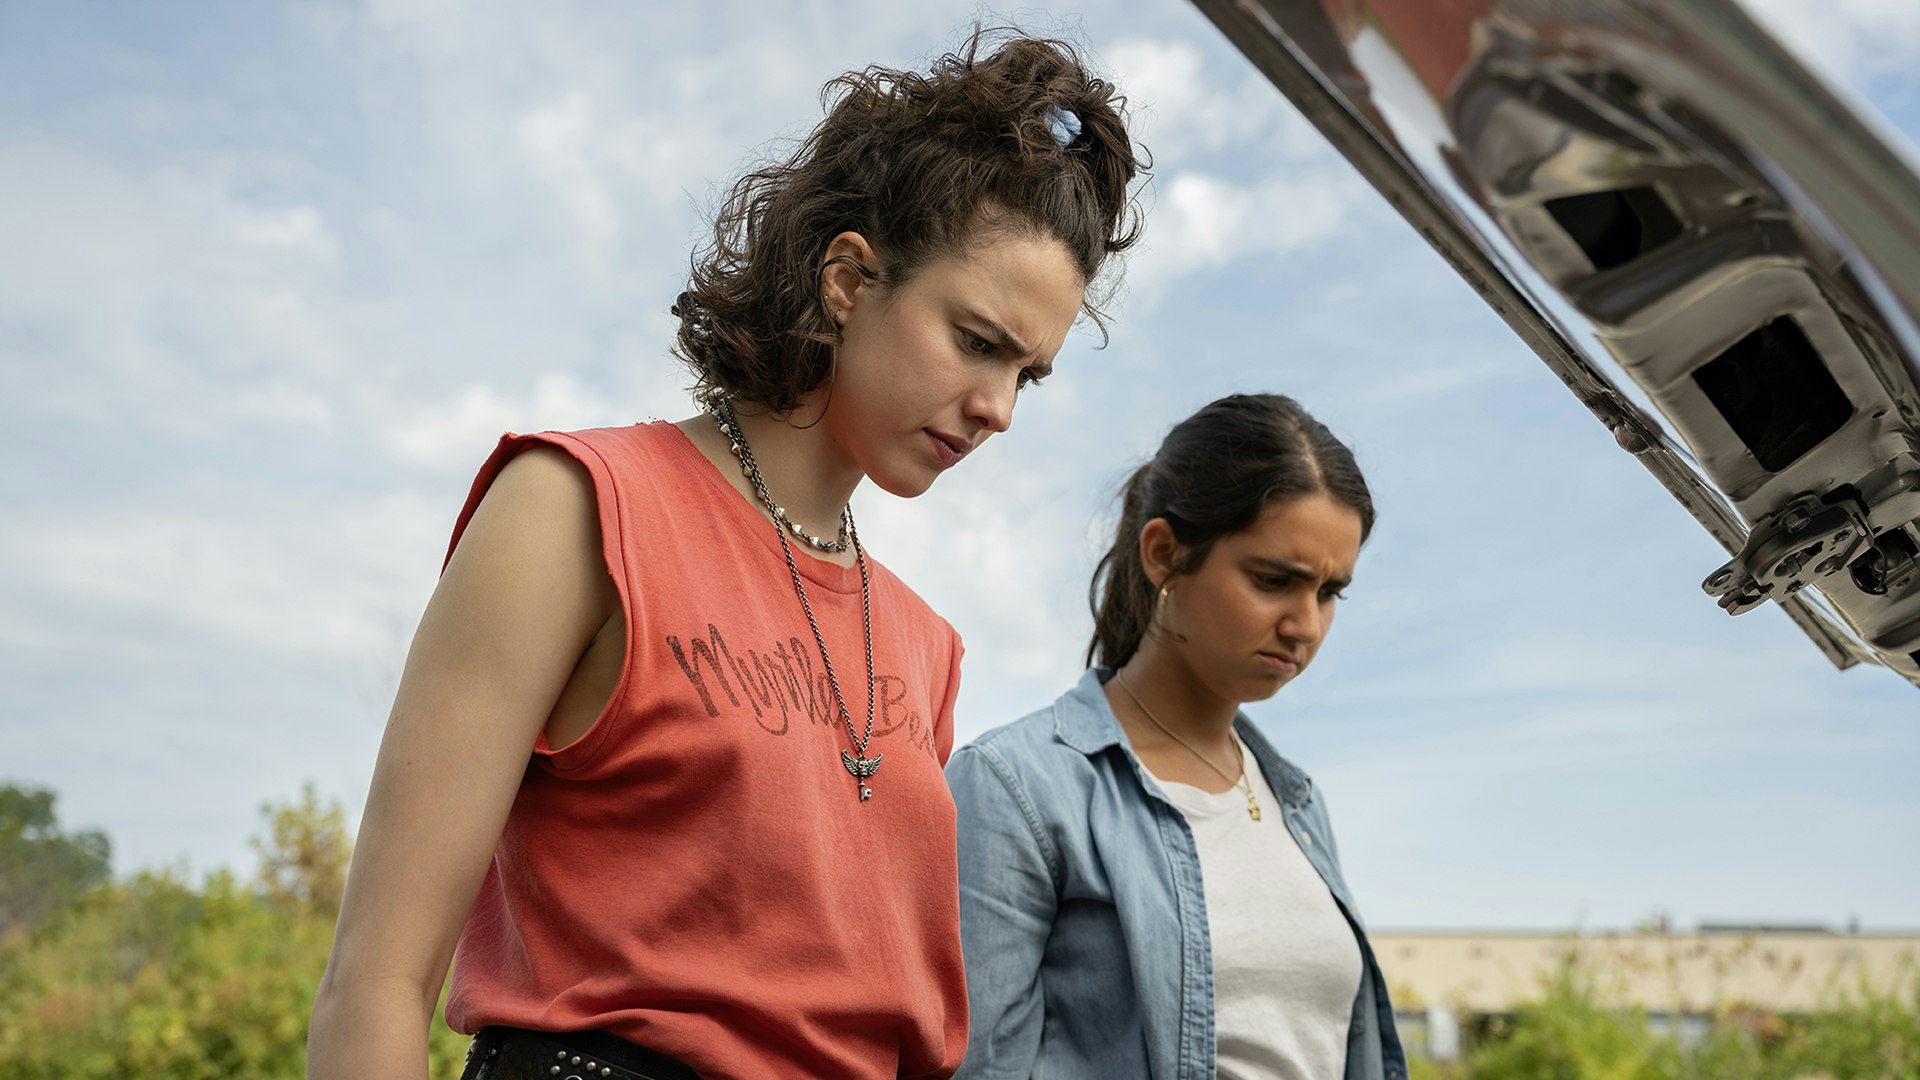 Margaret Qualley and Geraldine Viswanathan in Ethan Coen’s first solo movie, Drive-Away Dolls. Photo: Wilson Webb/Working Title/Focus Features